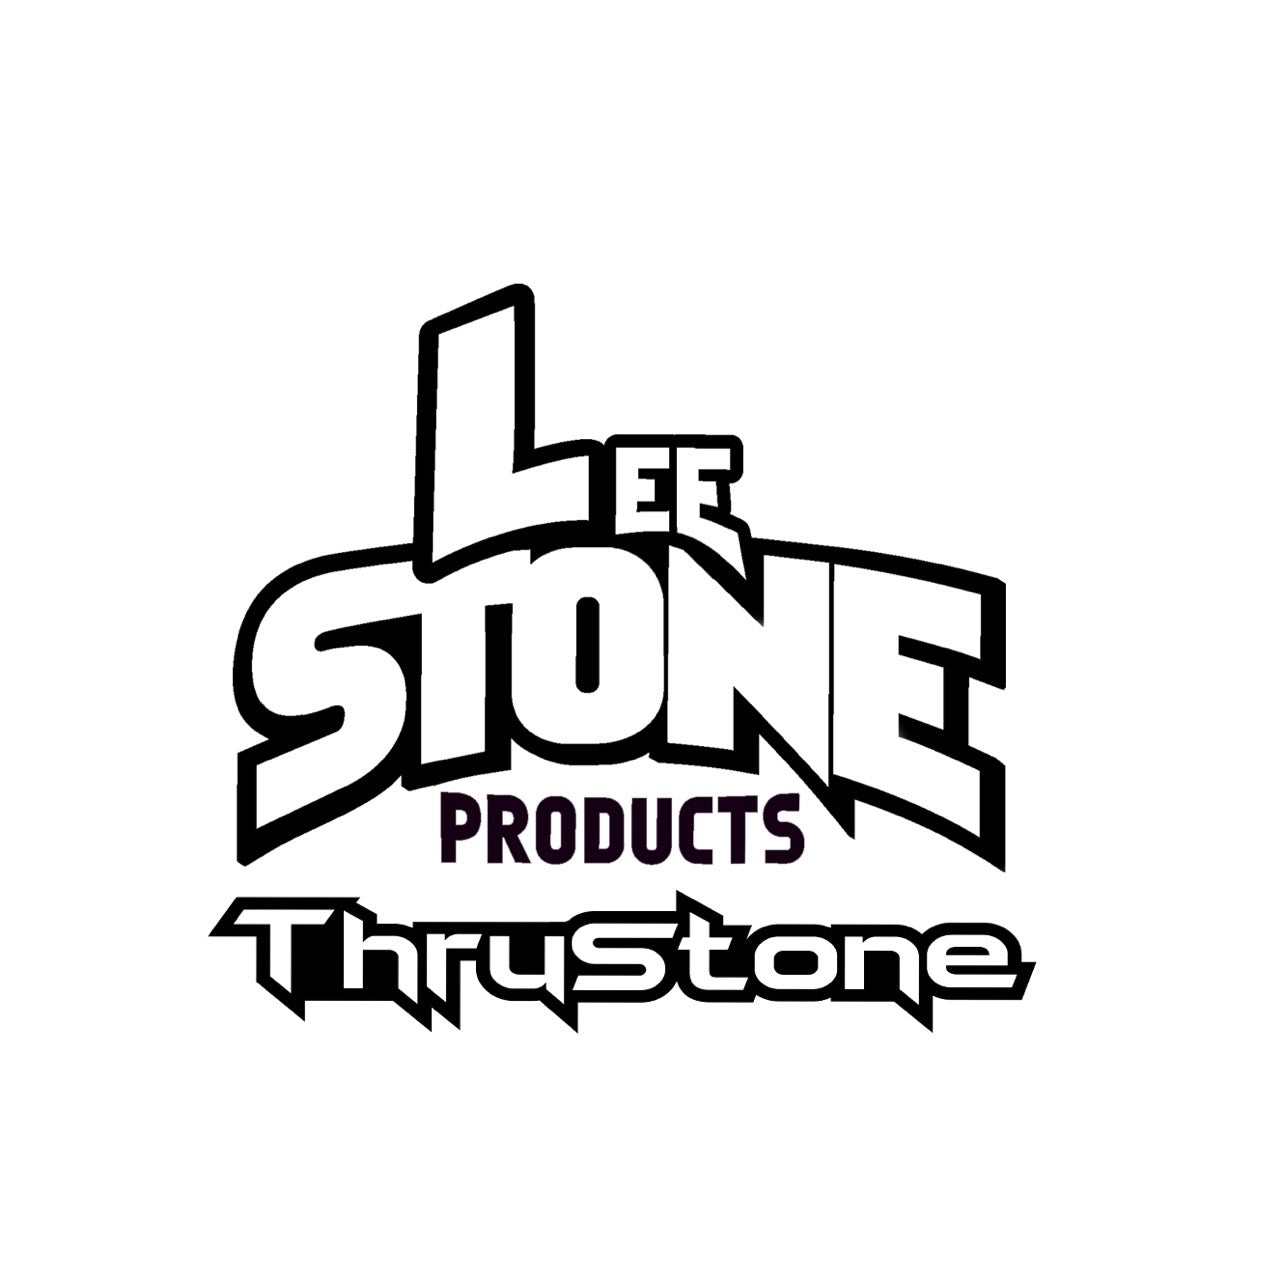 LSP(Lee Stone Products) Covers